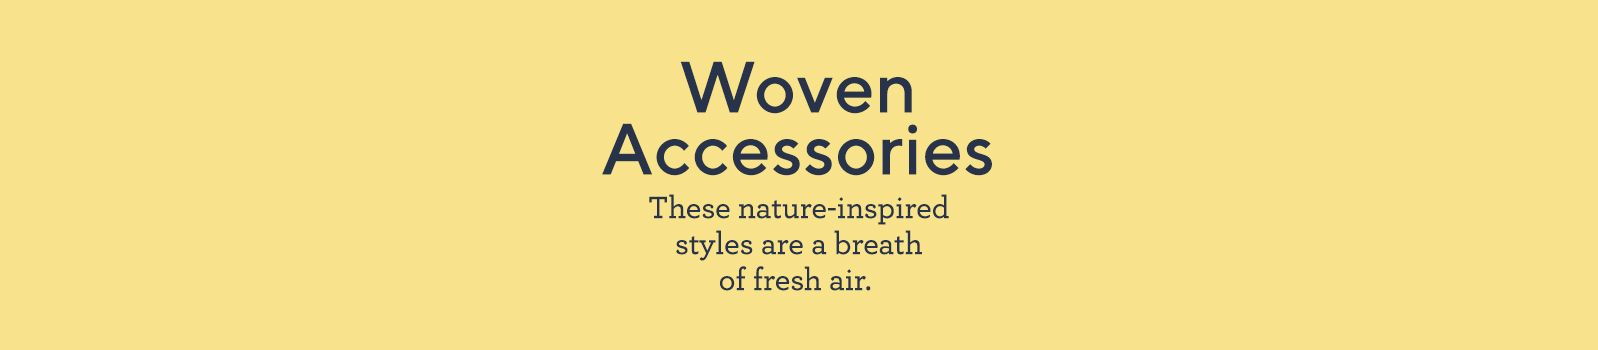 Woven Accessories These nature-inspired styles are a breath of fresh air.